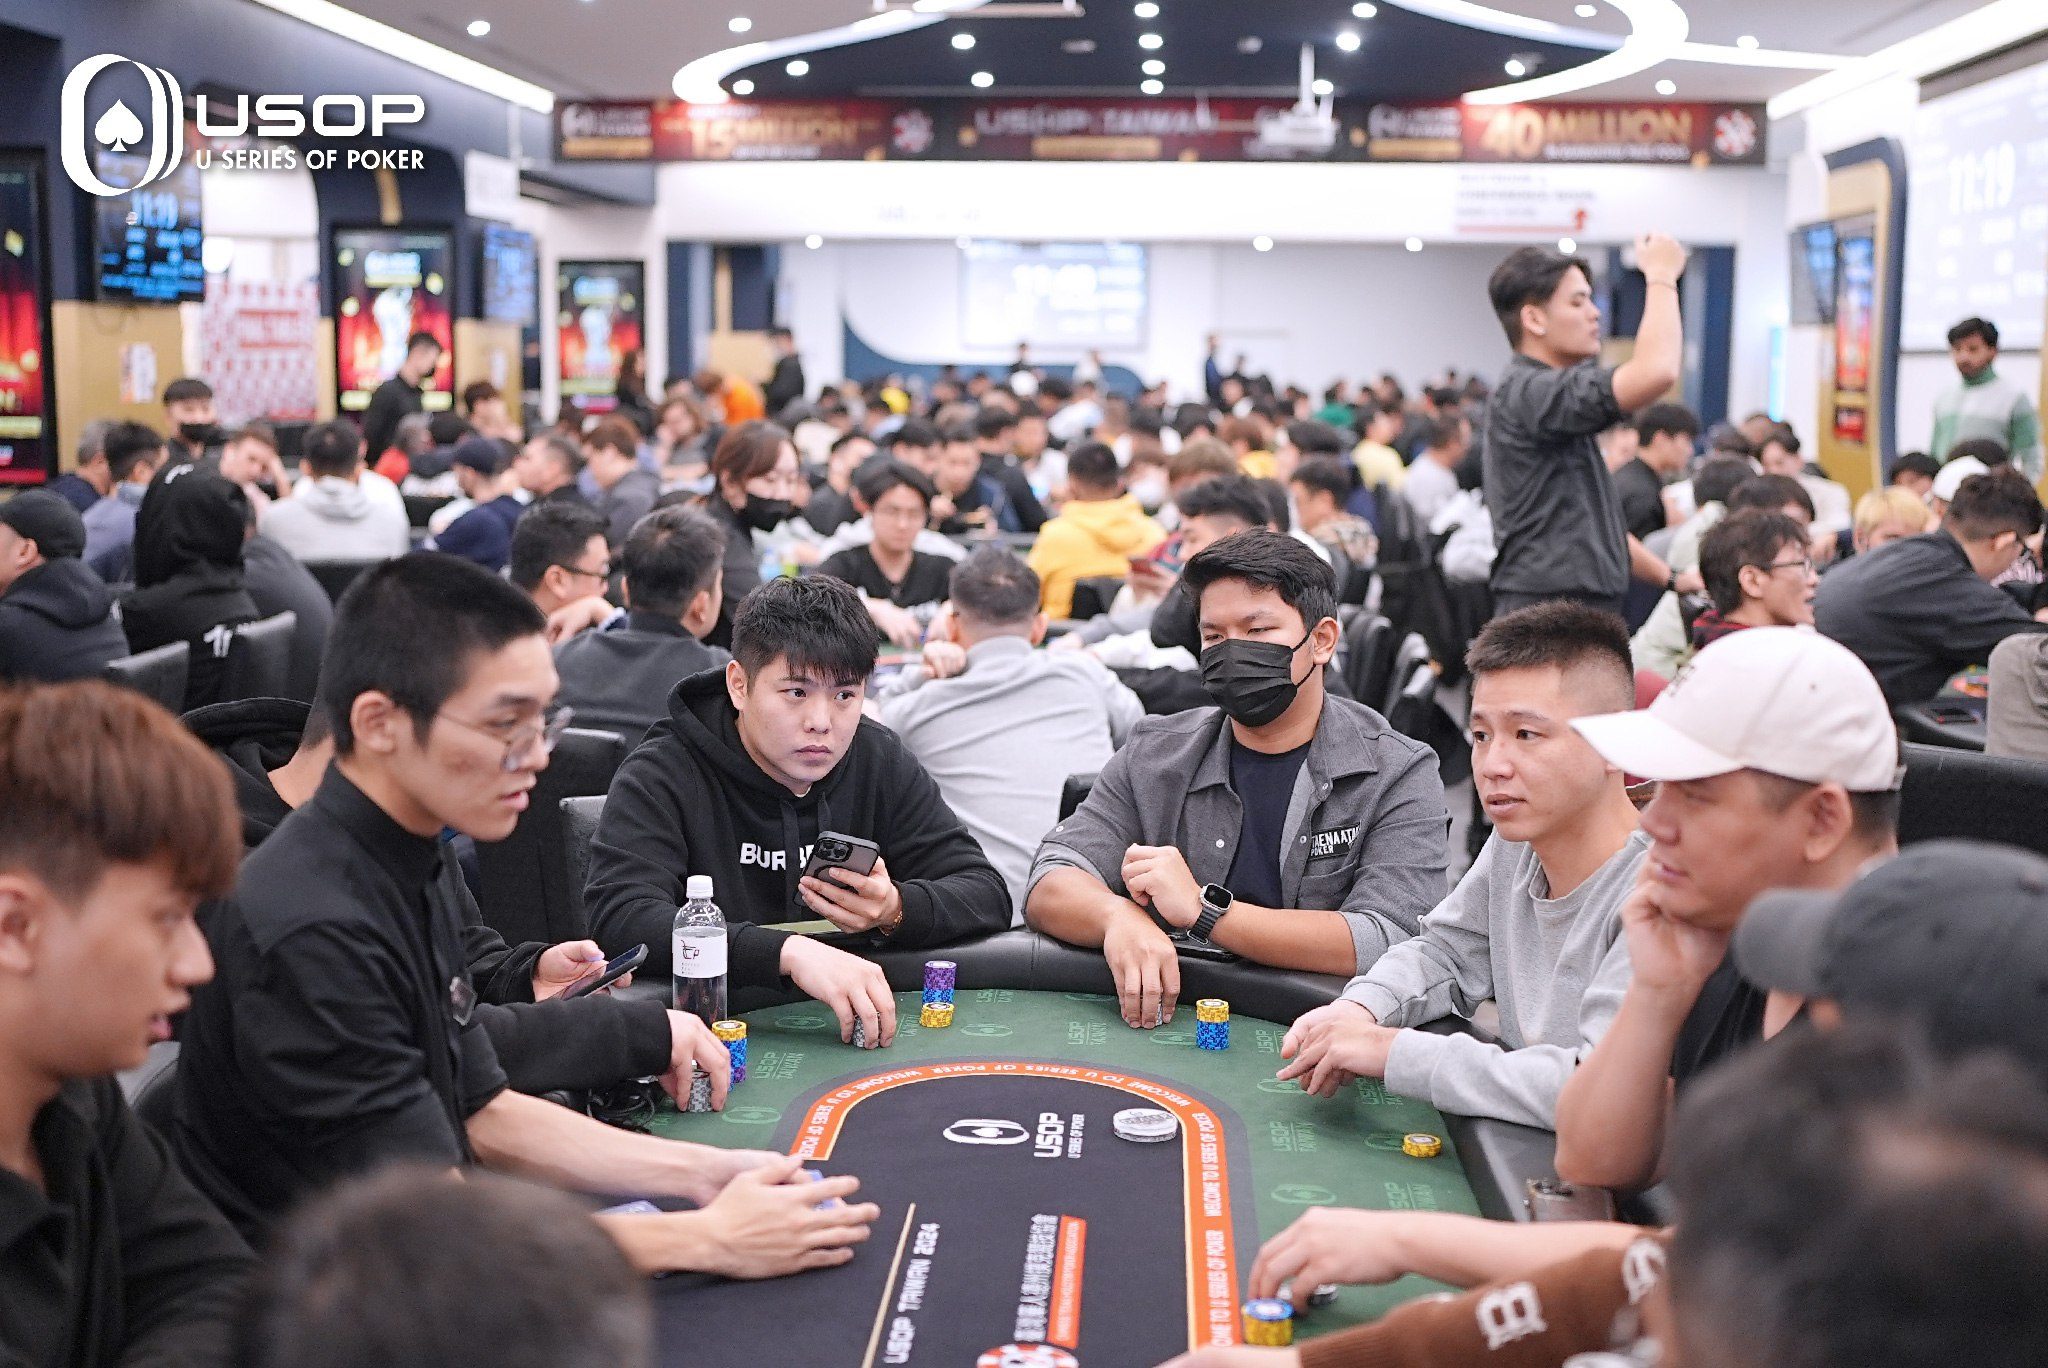 USOP Taiwan Main Event turnout through the roof as prize pool catapults to over USD 1 Million; Singapore's Guan Hao Tan leads in 139 players